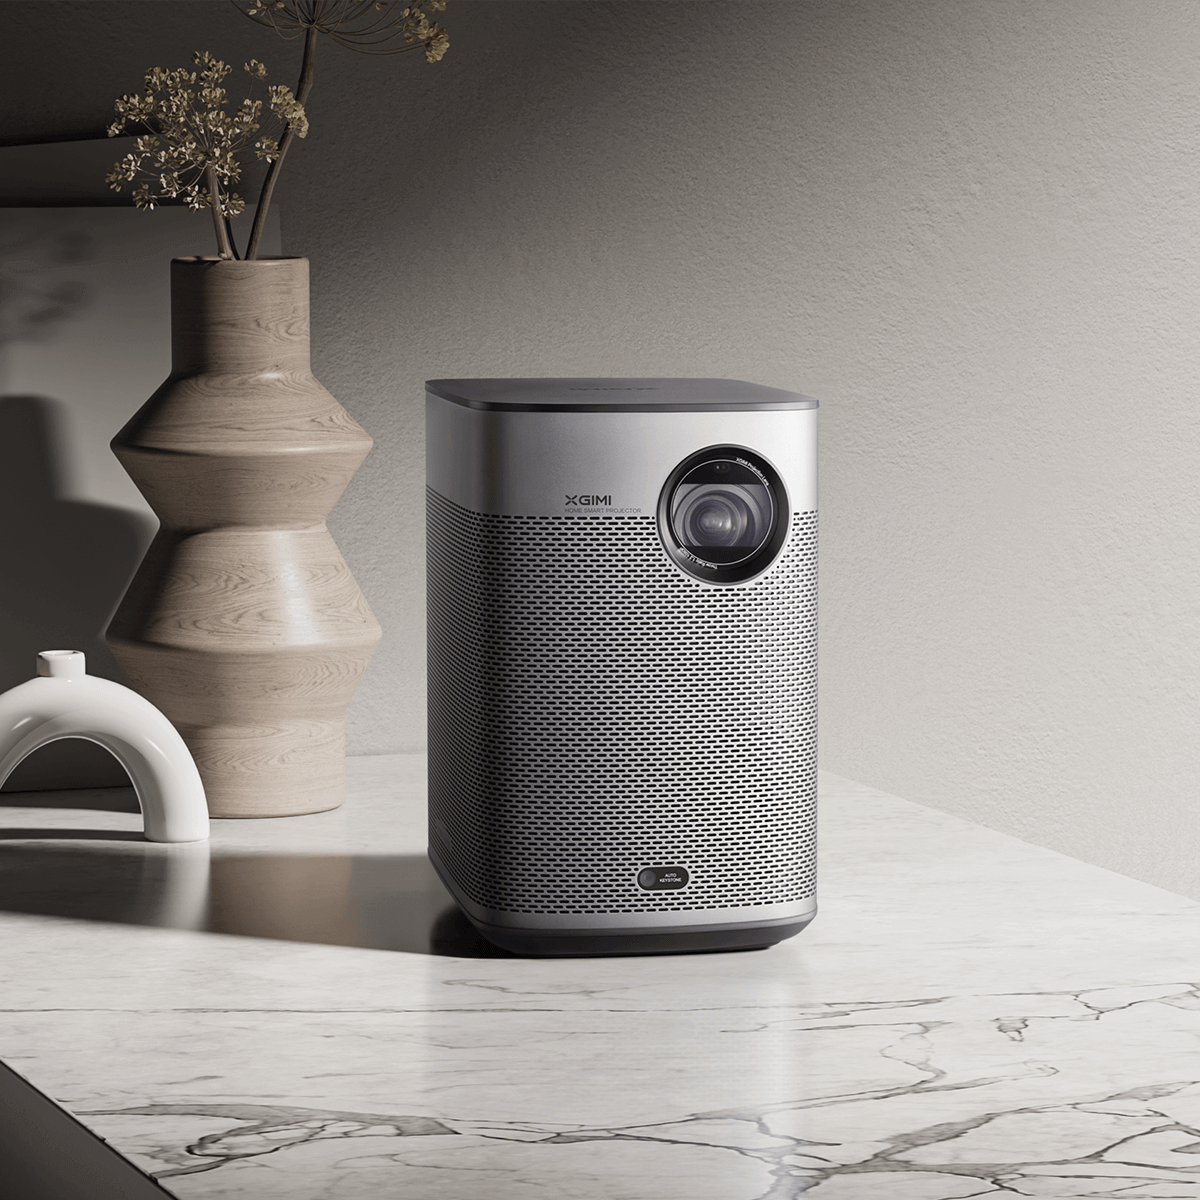 Easily enliven any karaoke night or your favorite music via Bluetooth connection with Halo+ projector